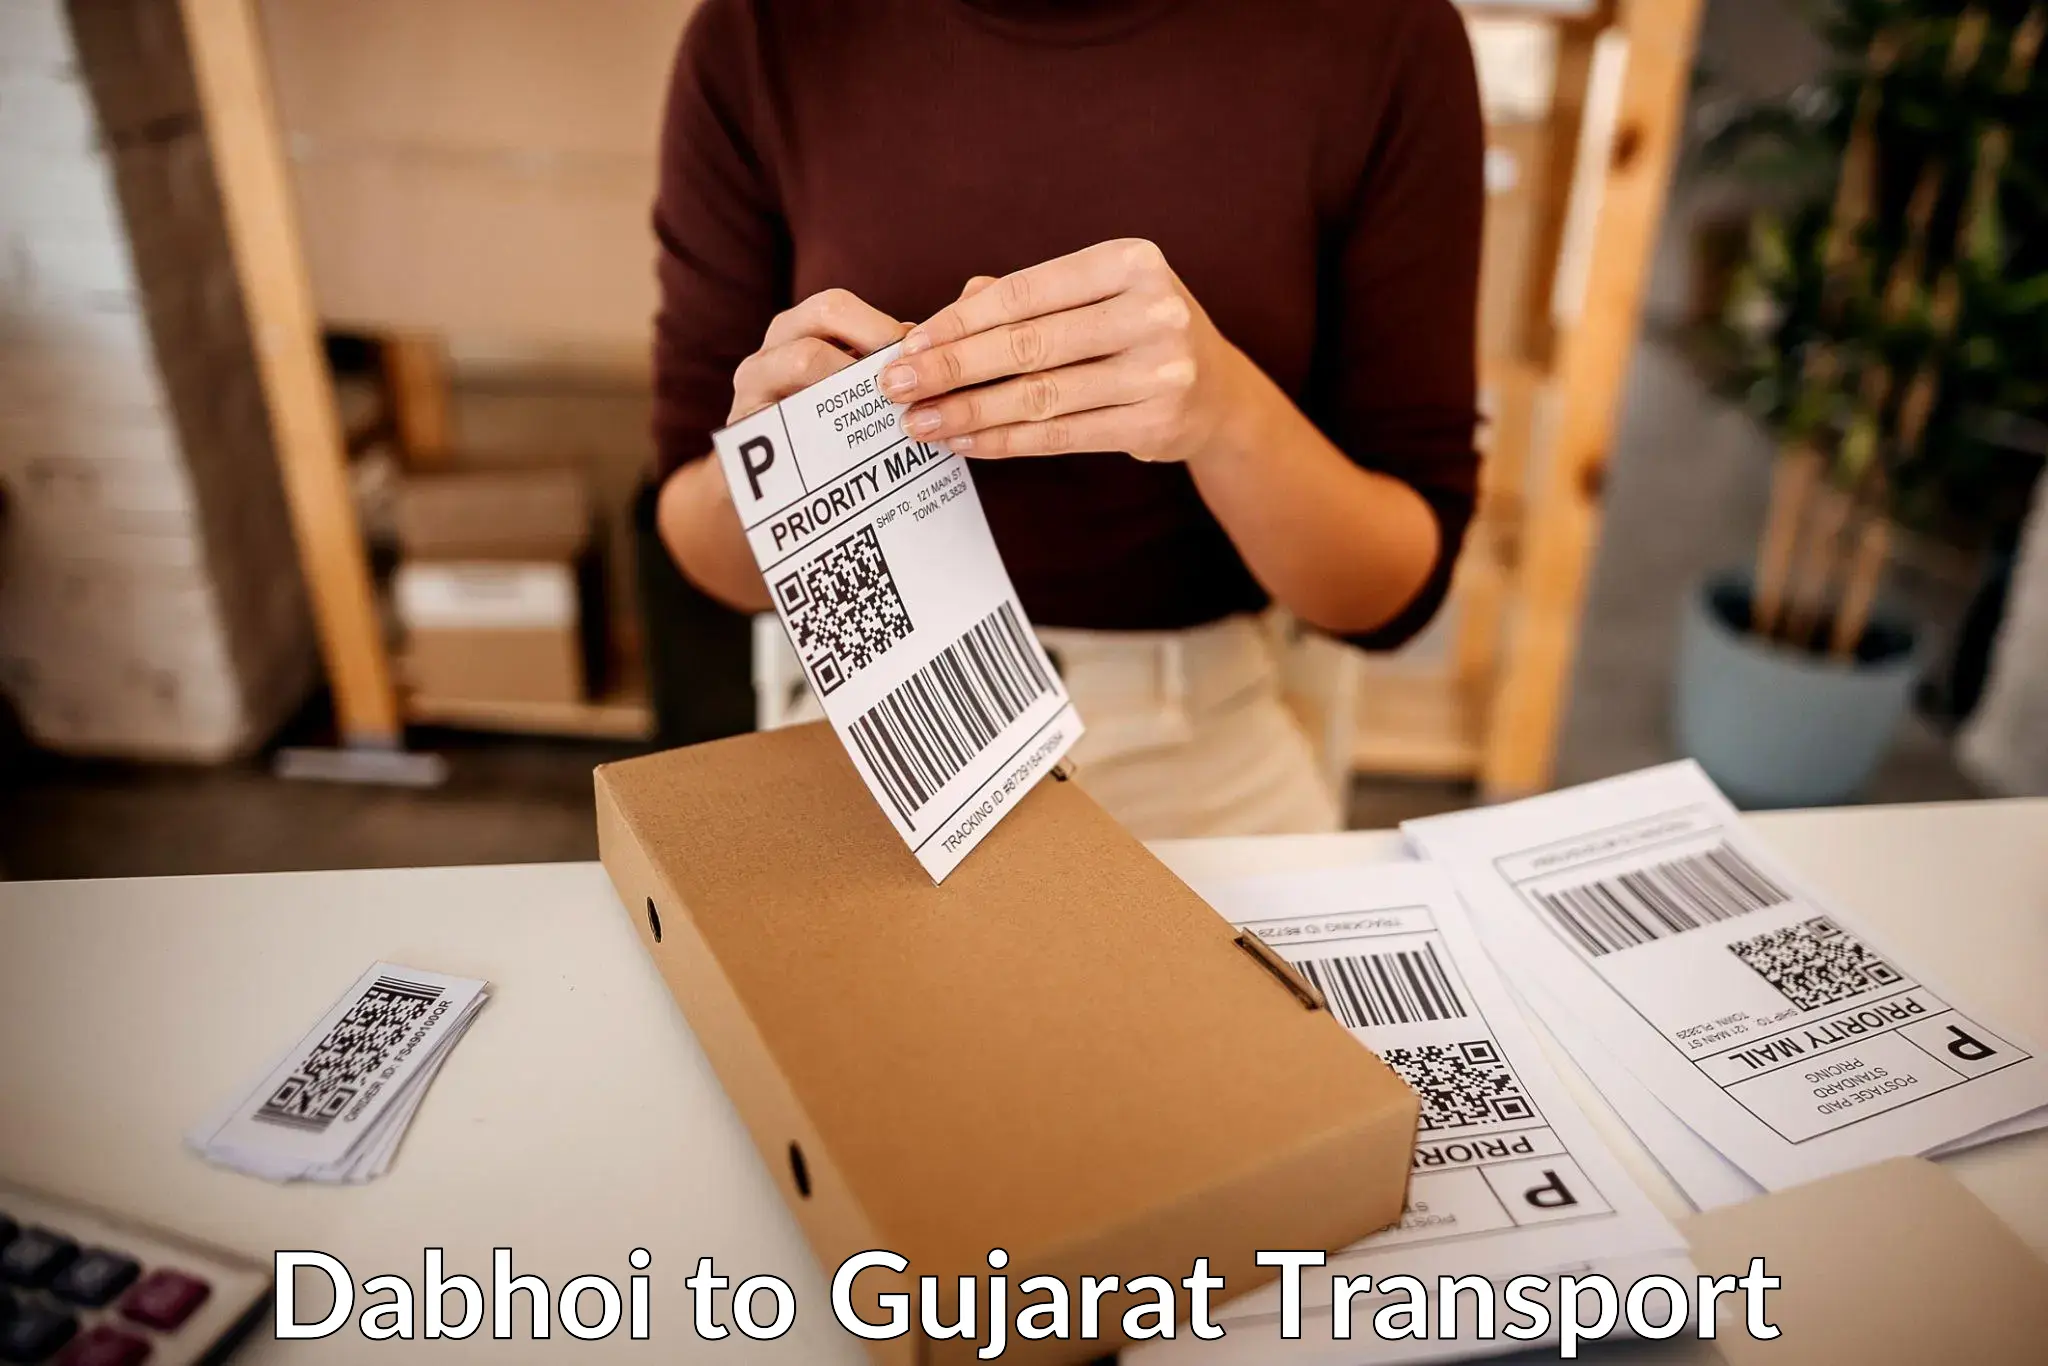 Commercial transport service Dabhoi to Becharaji